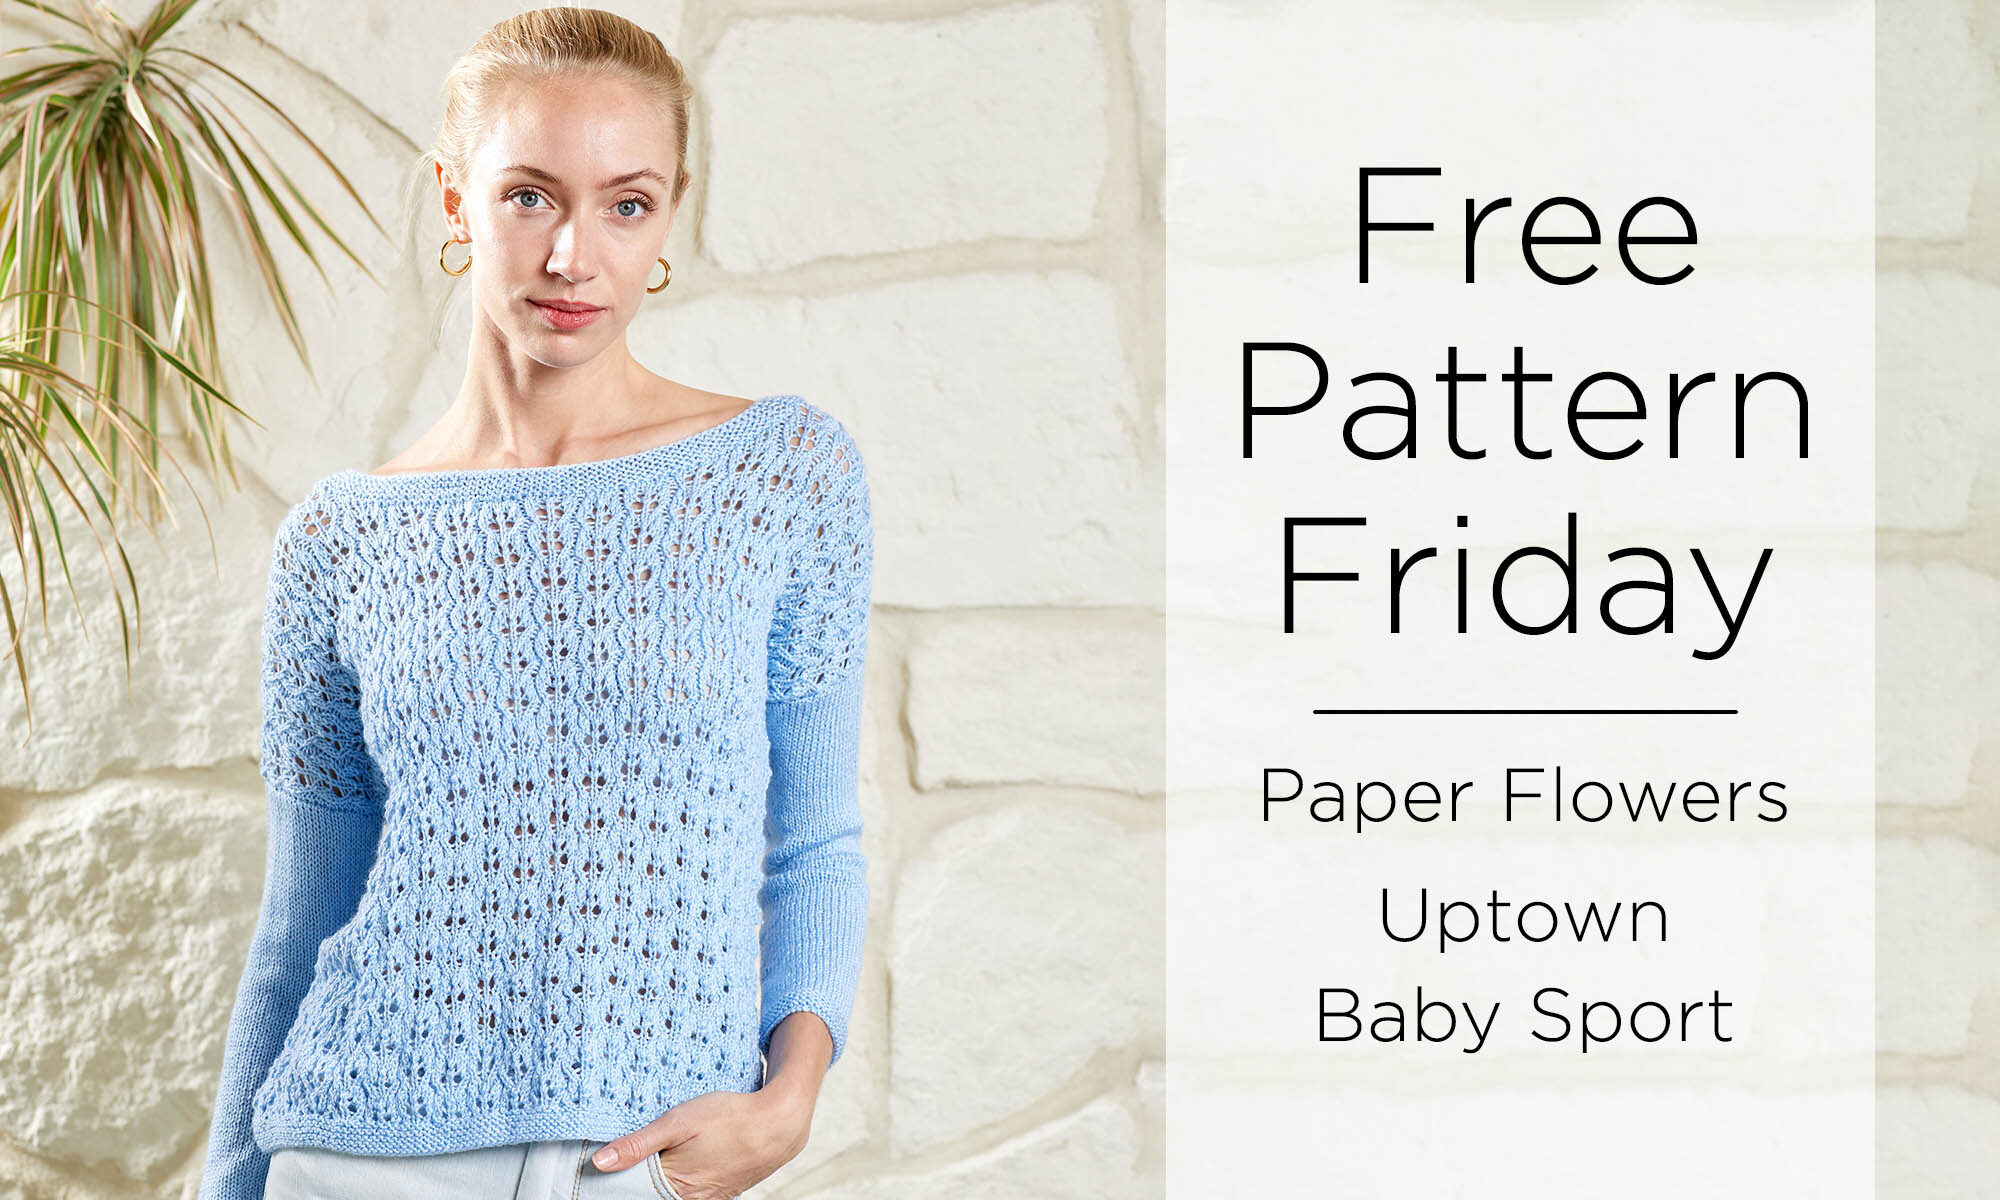 Woman in knitted lace pullover. Text reads, Free Pattern Friday, Paper Flowers in Uptown Baby Sport